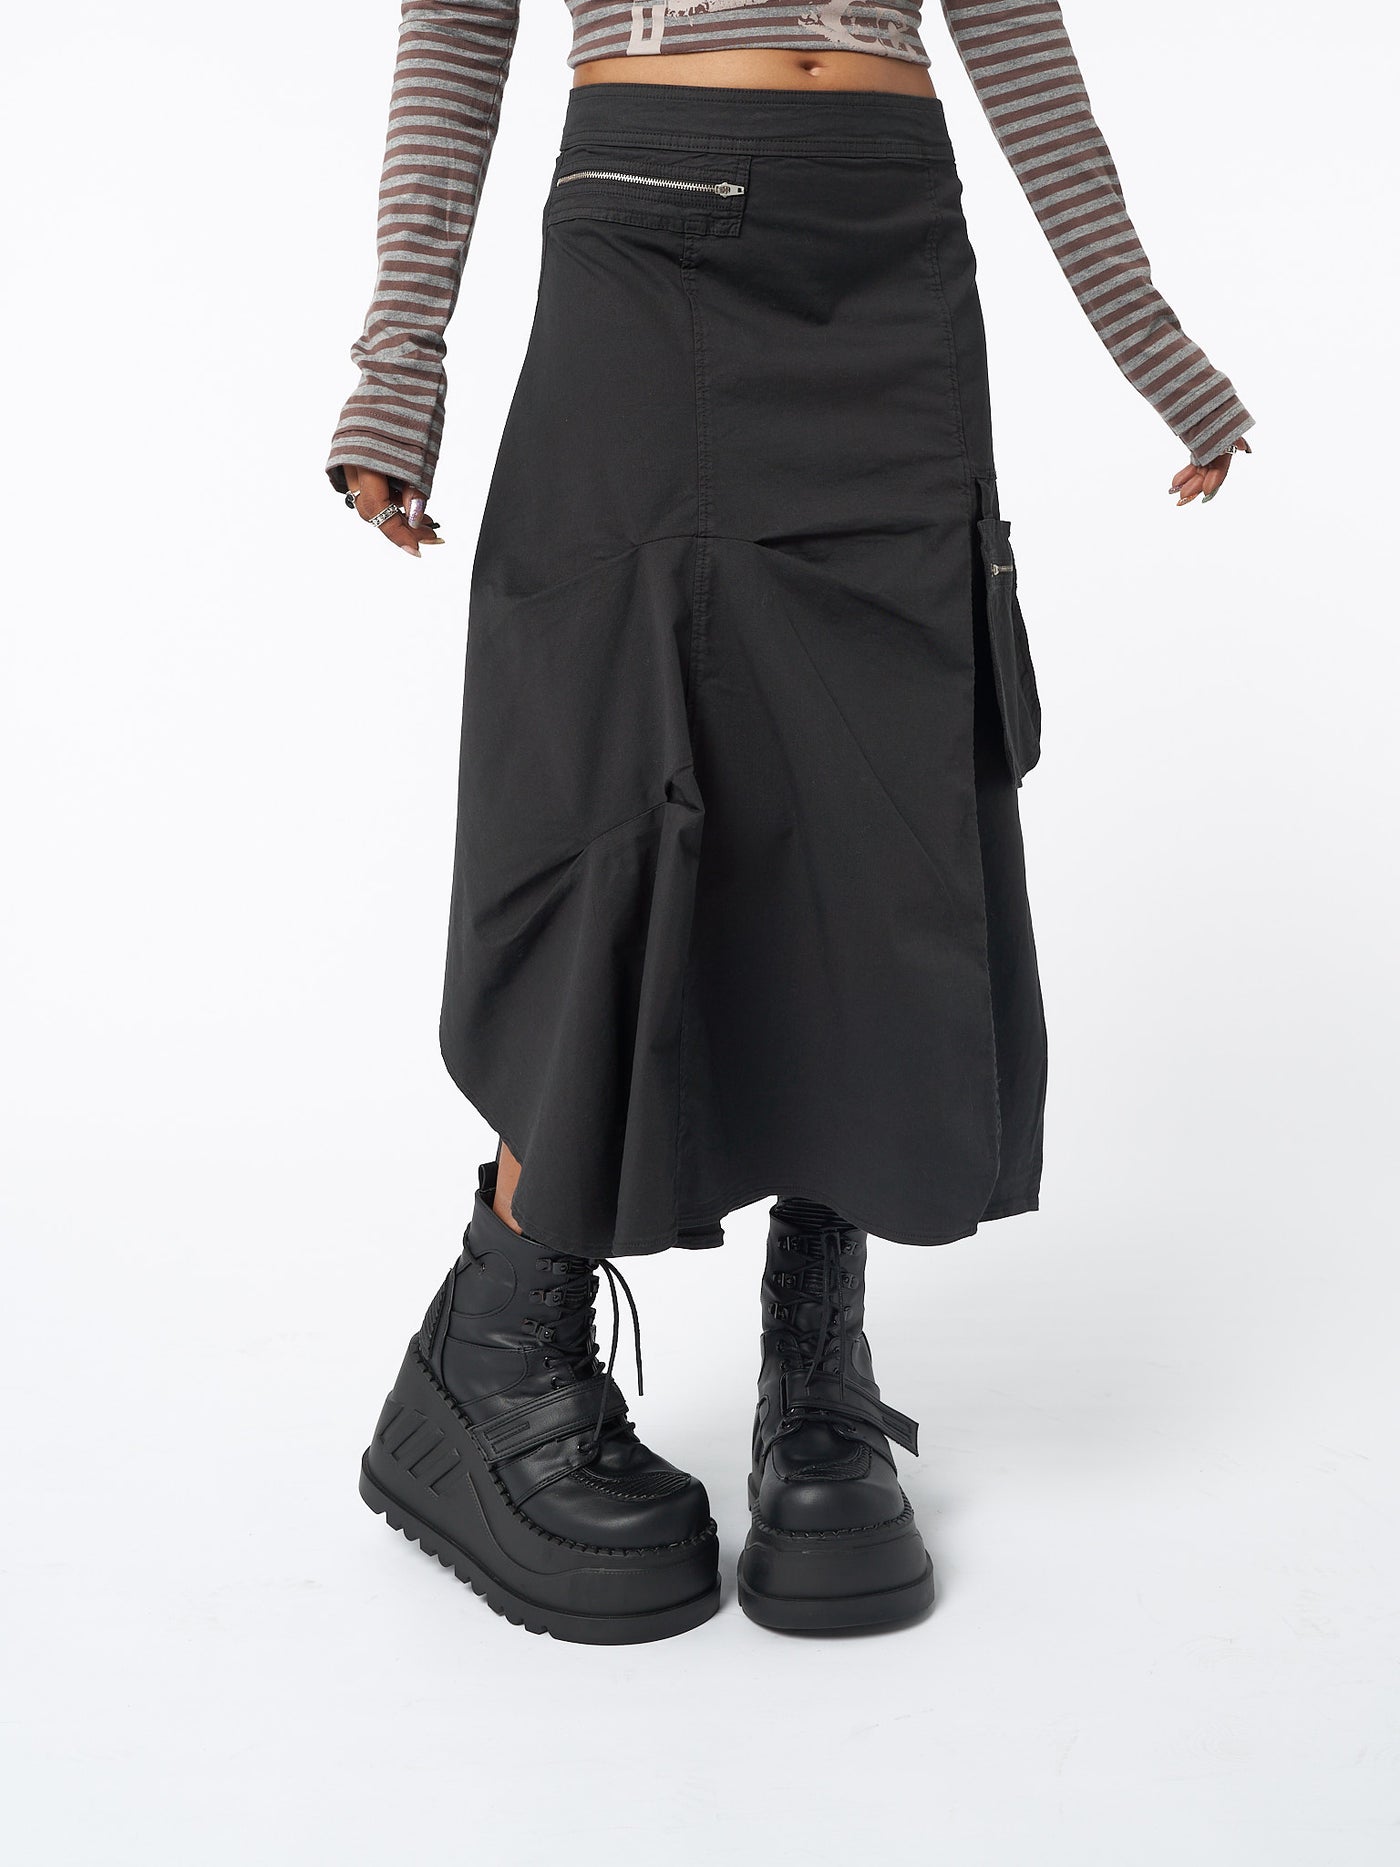 Maxi tech cargo skirt in black with asymmetric style, zip details and front hanging pocket